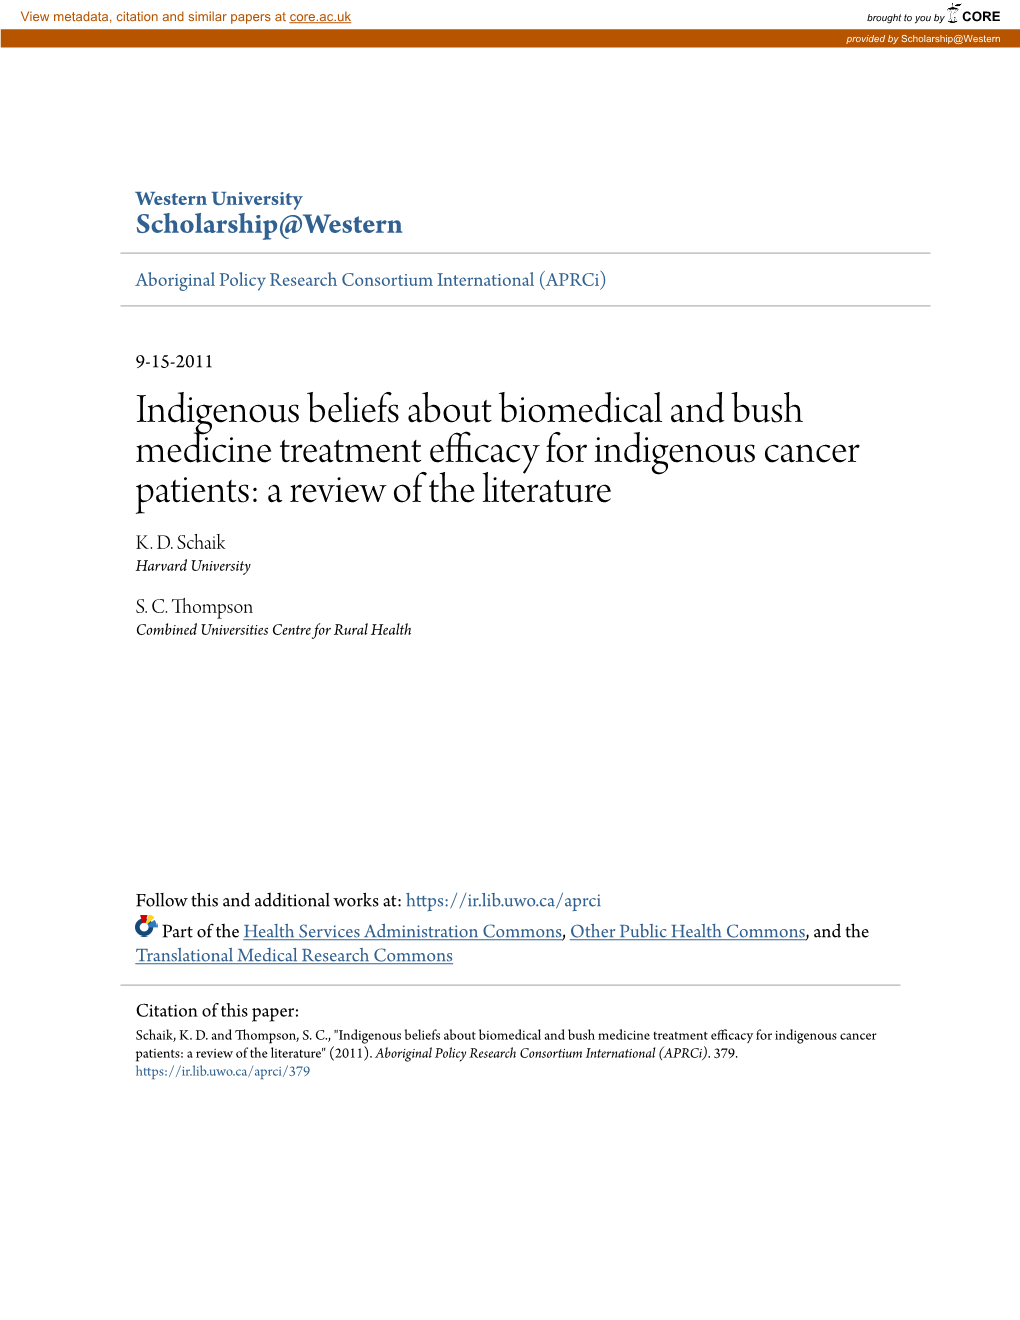 Indigenous Beliefs About Biomedical and Bush Medicine Treatment Efficacy for Indigenous Cancer Patients: a Review of the Literature K